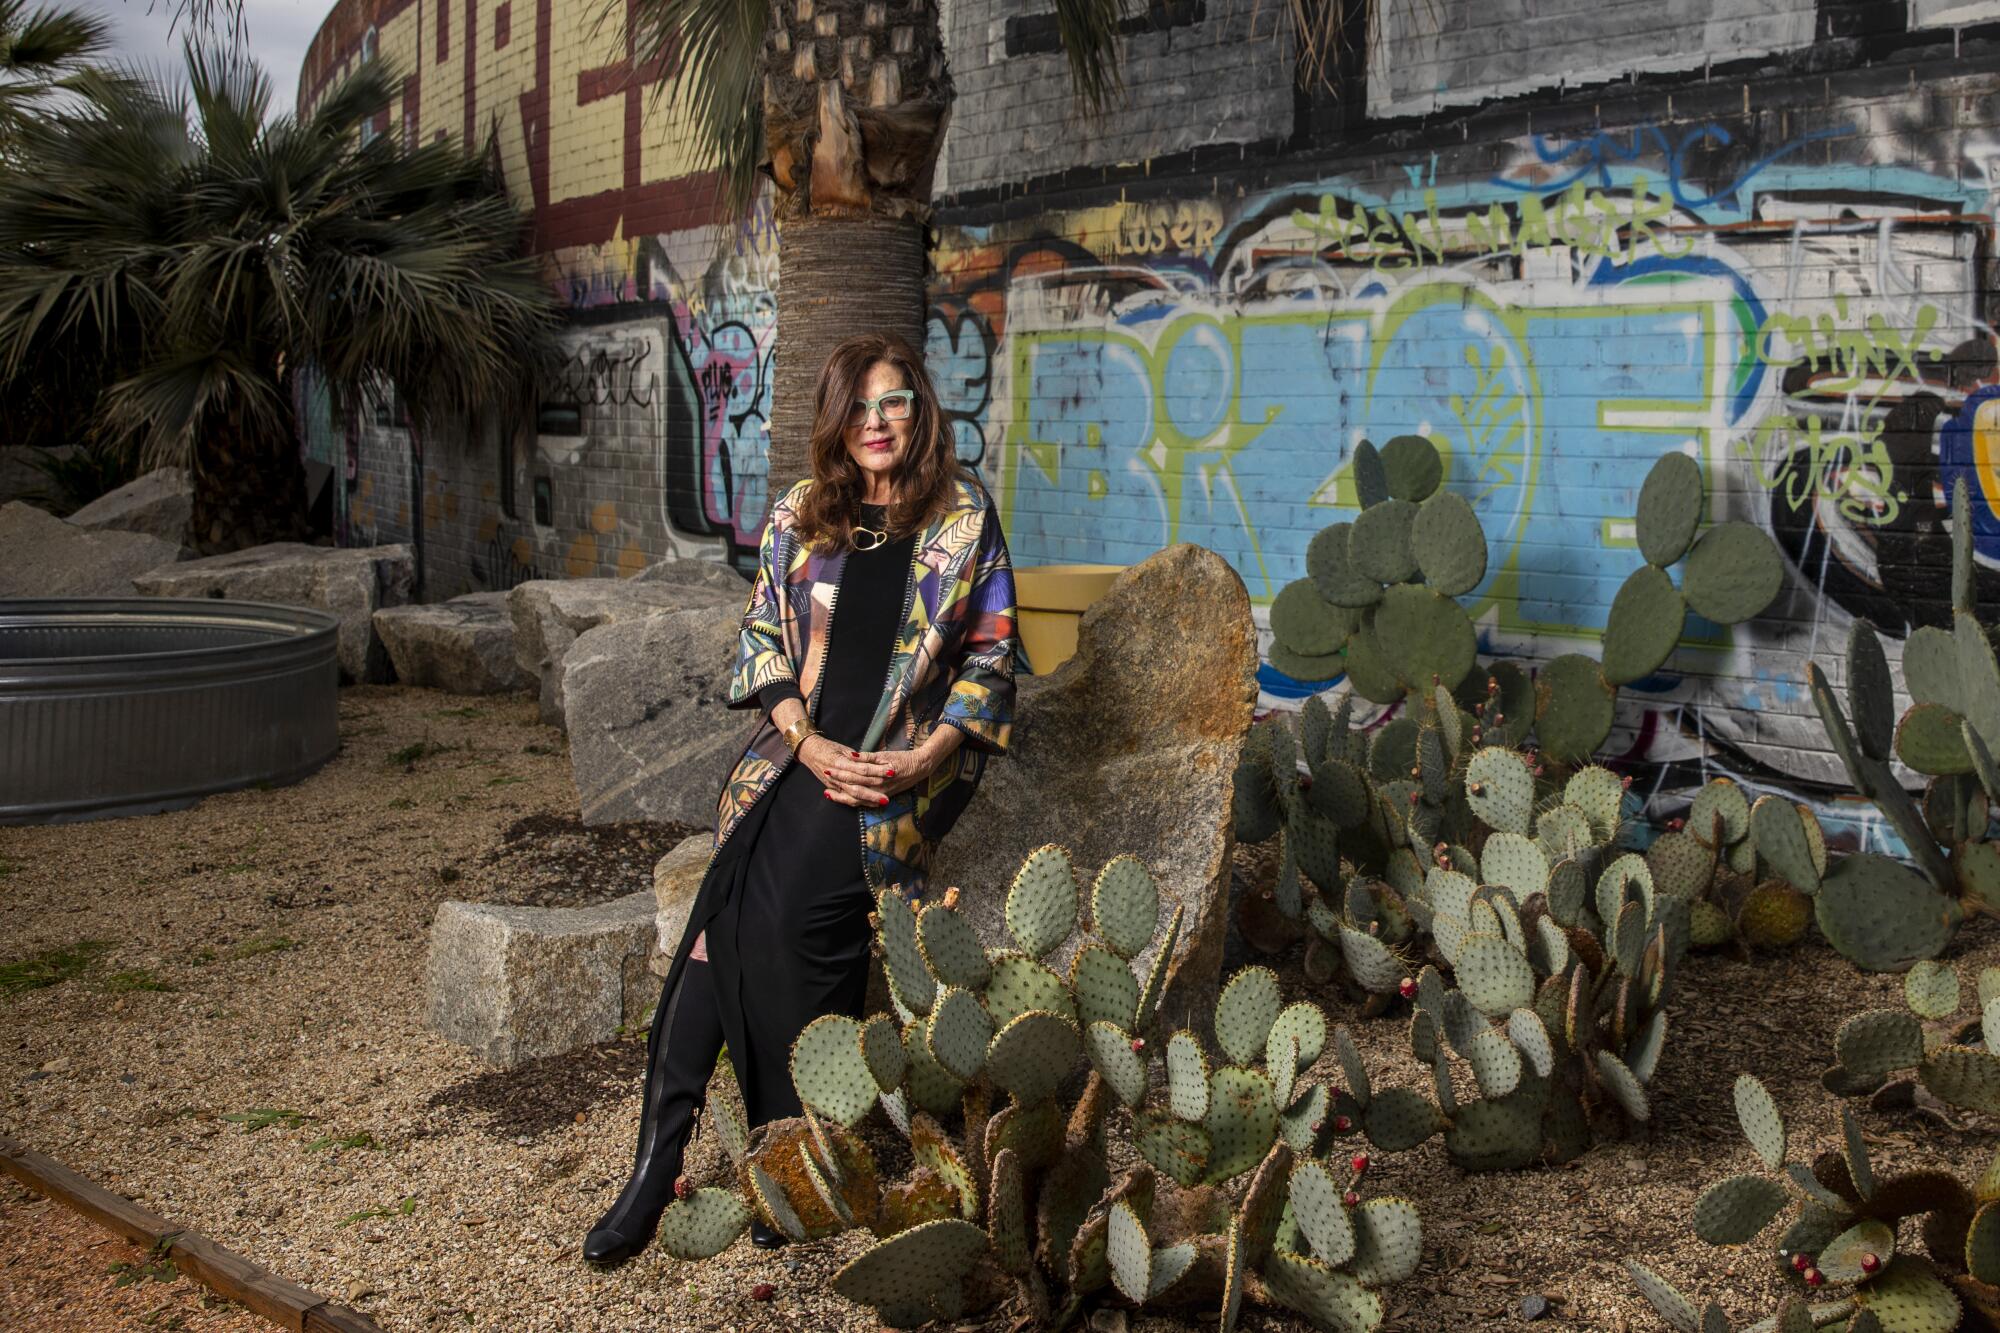 Landscape architect Mia Lehrer sits on a rock in an urban garden planted with cactuses and palms.